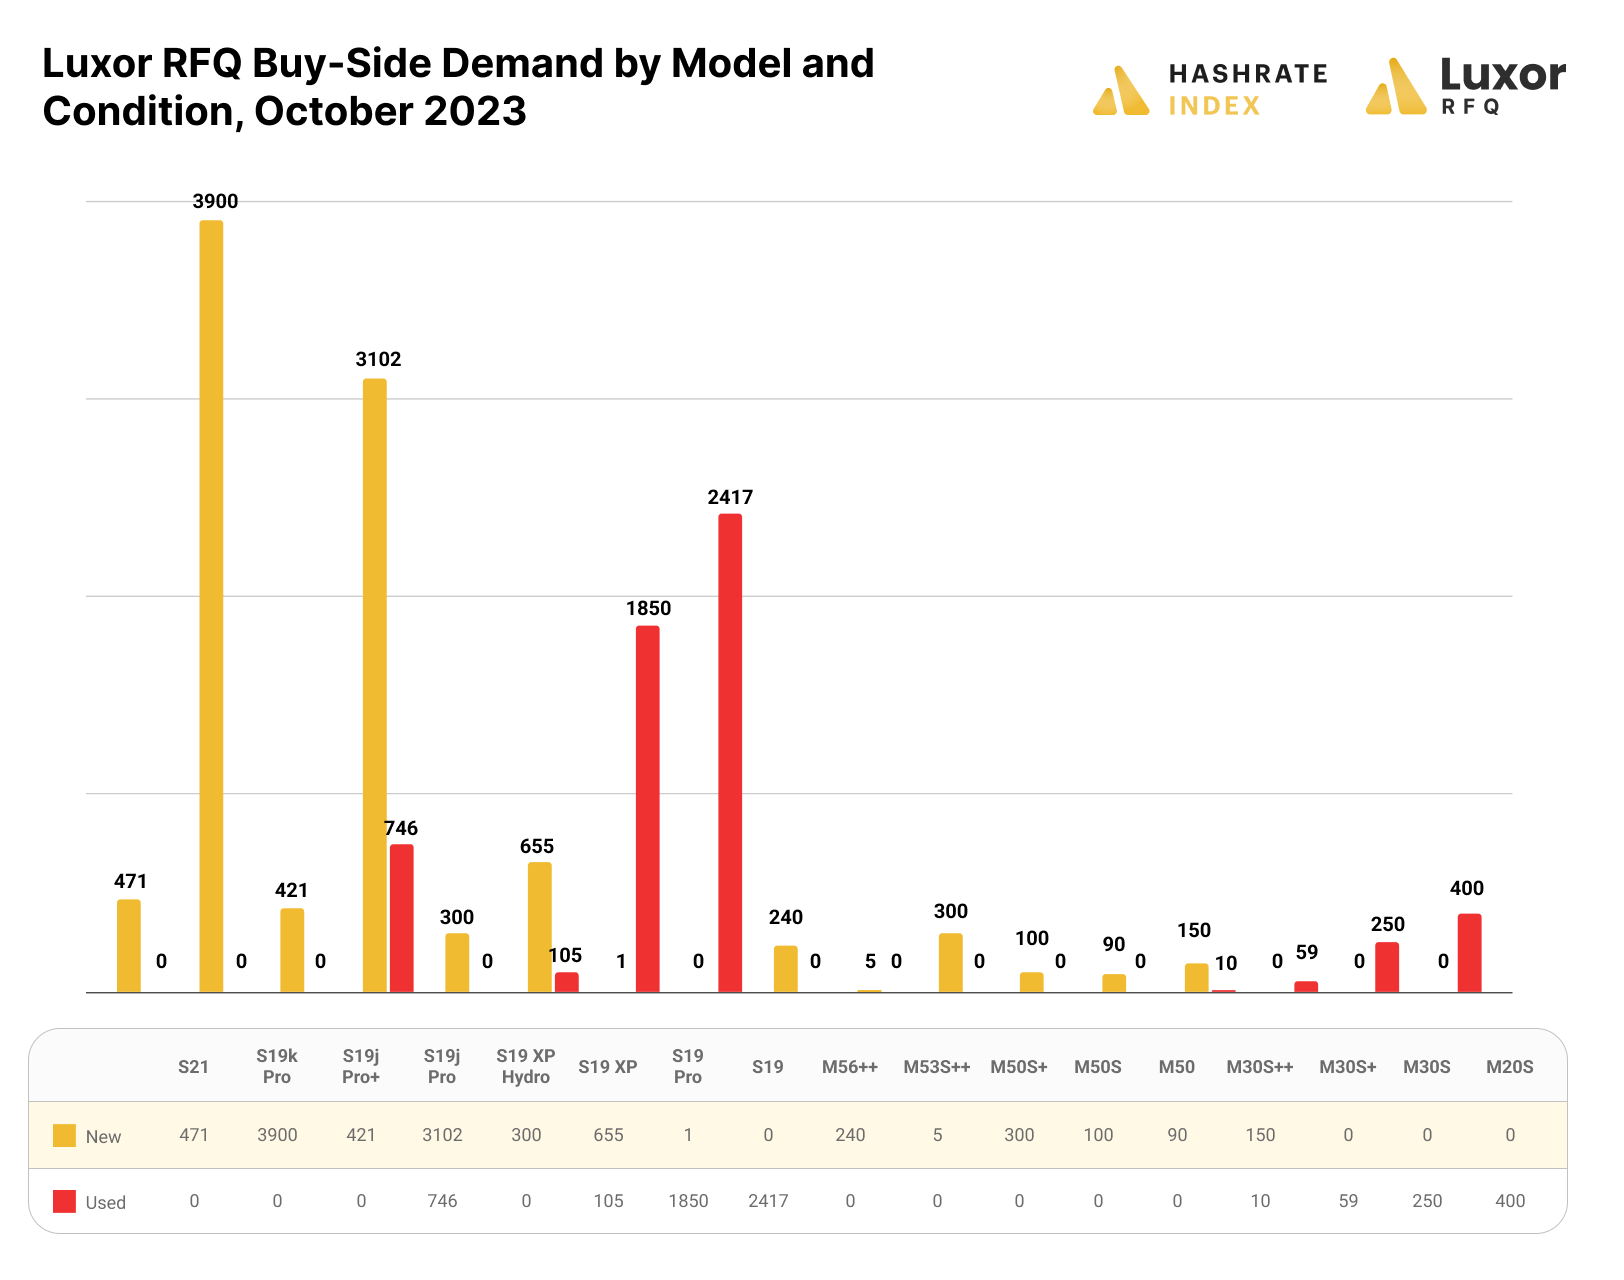 Luxor RFQ buy-side demand for October 2023